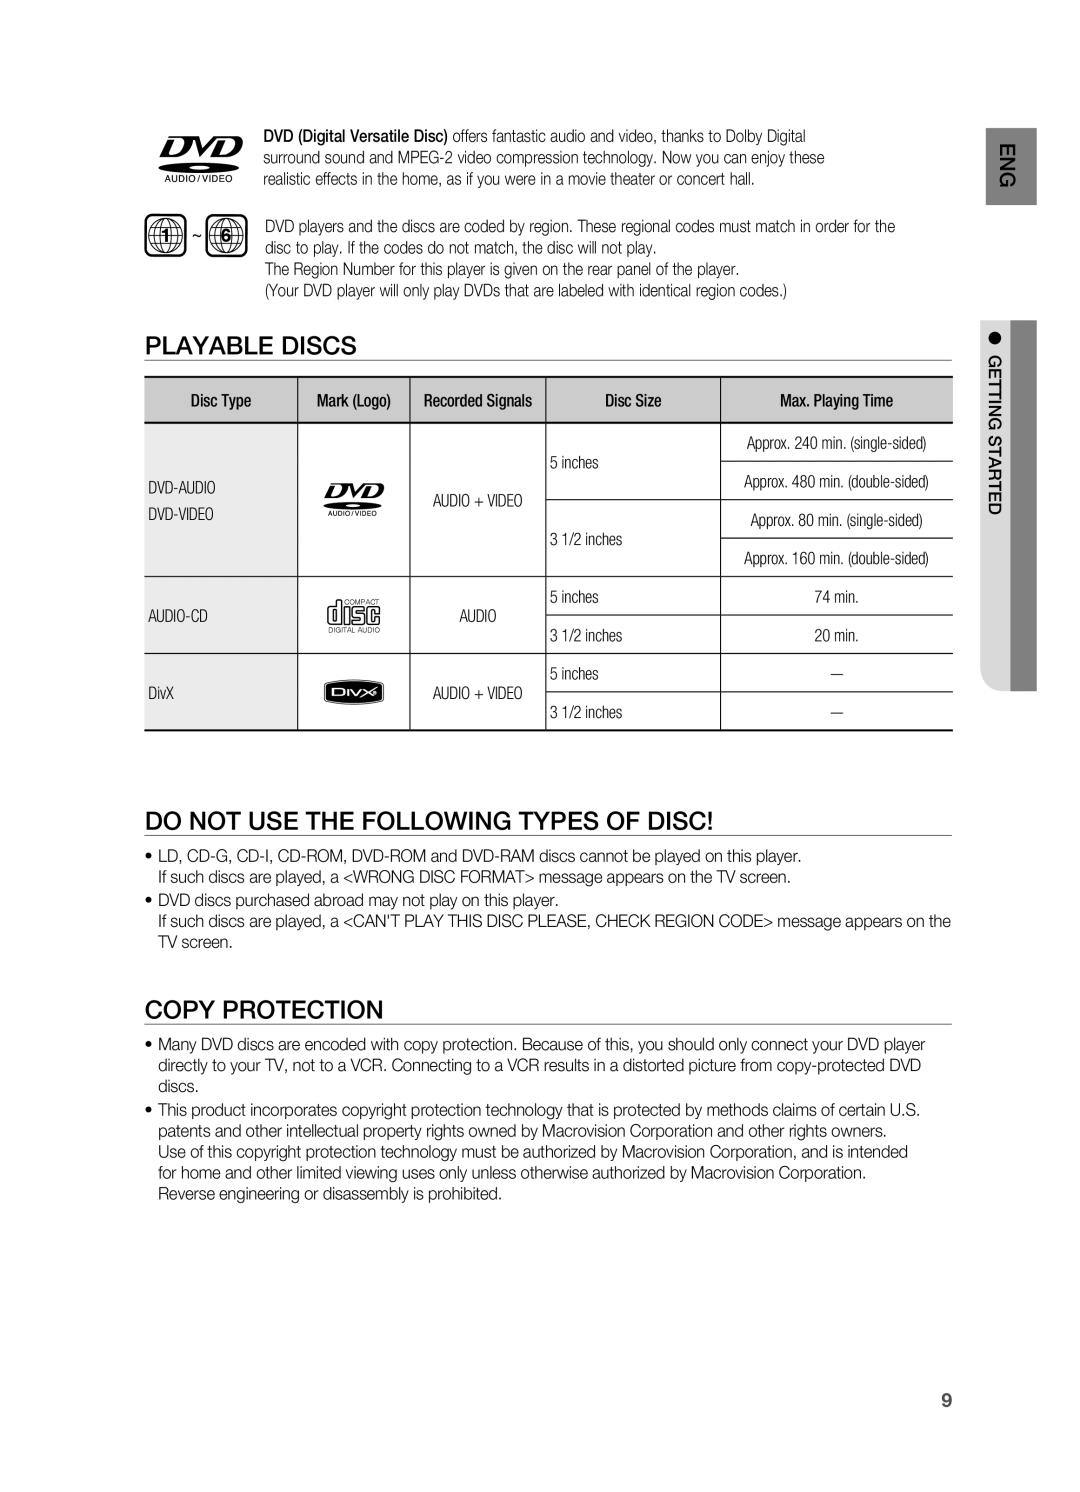 Samsung HT-TZ312 manual Playable Discs, Do not use the following types of disc, Copy Protection 